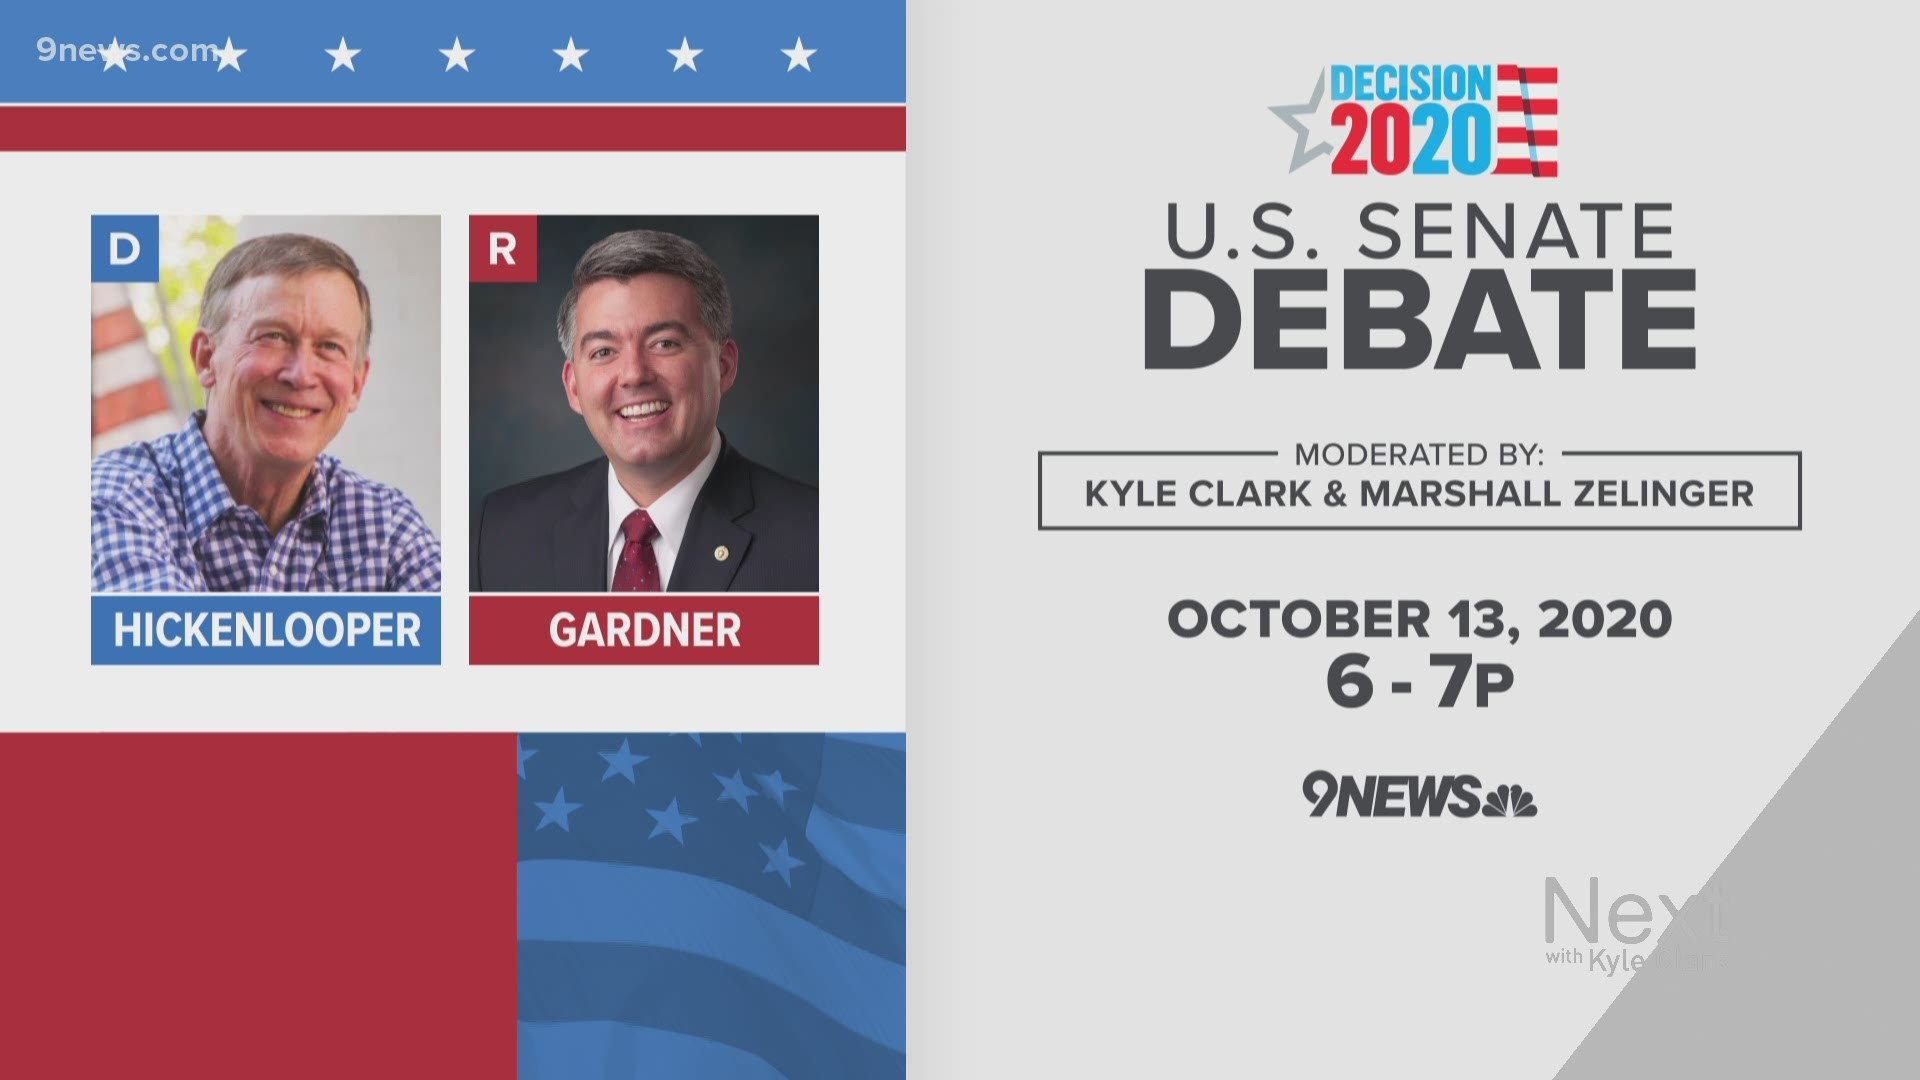 Voters will hear from both candidates competing in Colorado’s U.S. Senate race on Oct. 13 when they meet in a debate on 9NEWS, presented by Next with Kyle Clark.